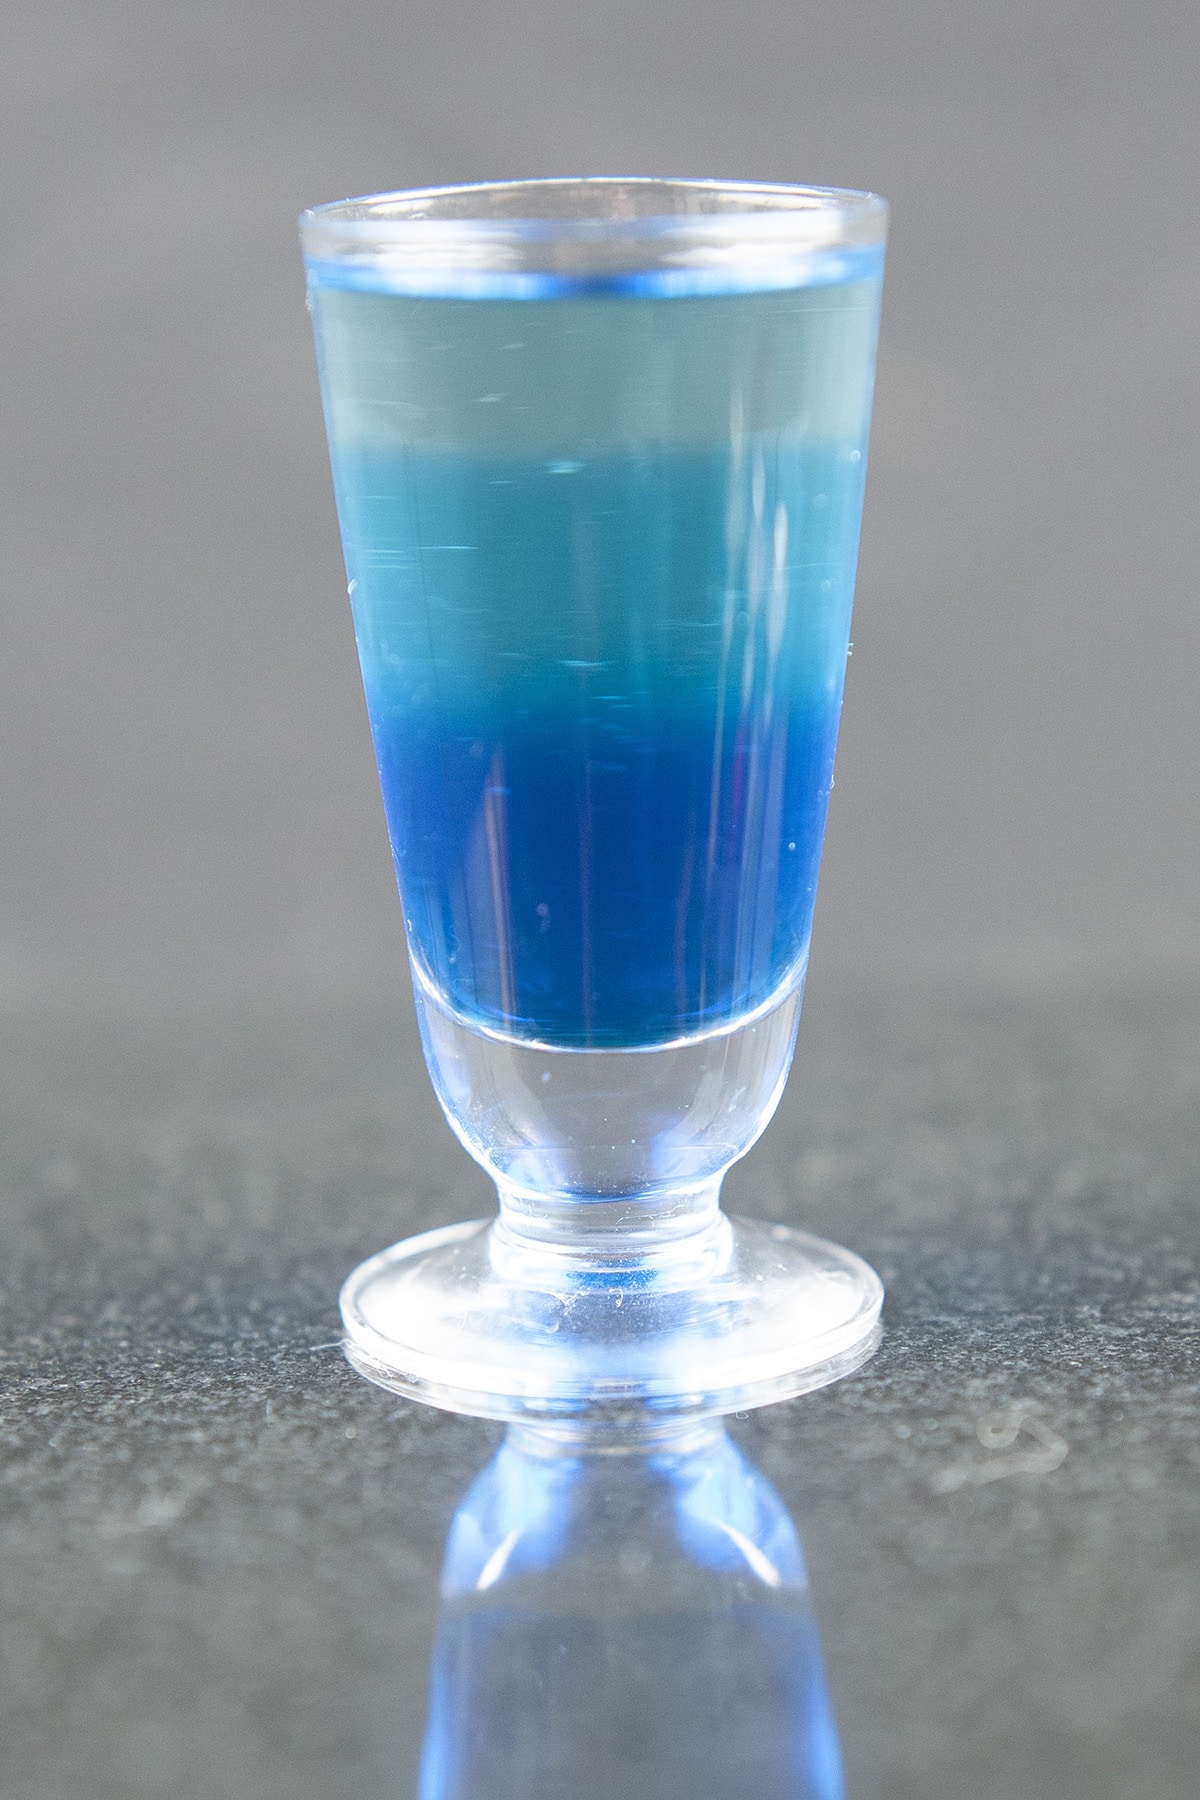 A layered shooter in shades of blue.